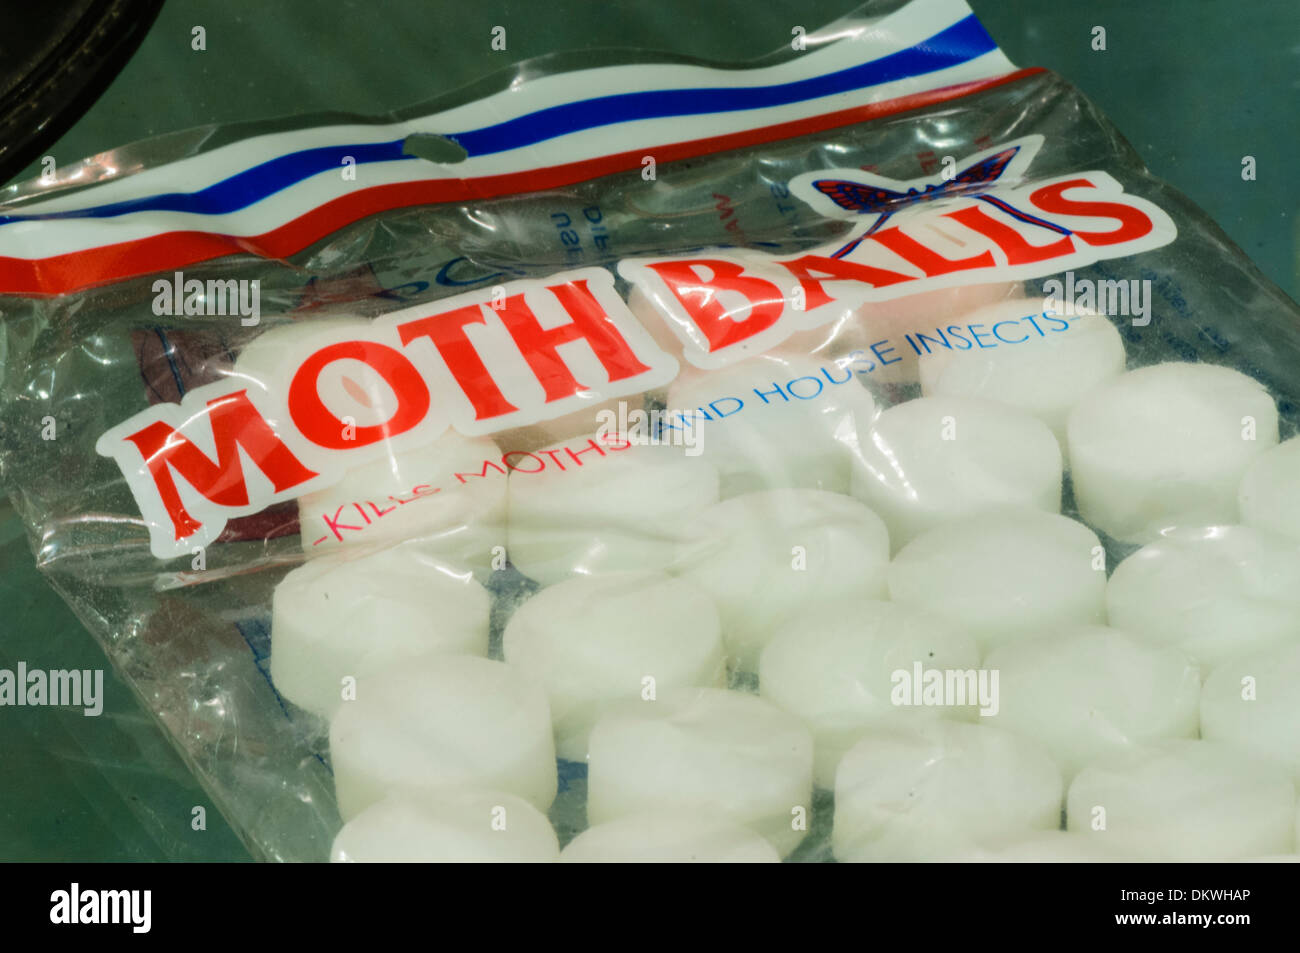 https://c8.alamy.com/comp/DKWHAP/packet-of-mothballs-naphthalene-to-kill-moths-and-other-household-DKWHAP.jpg